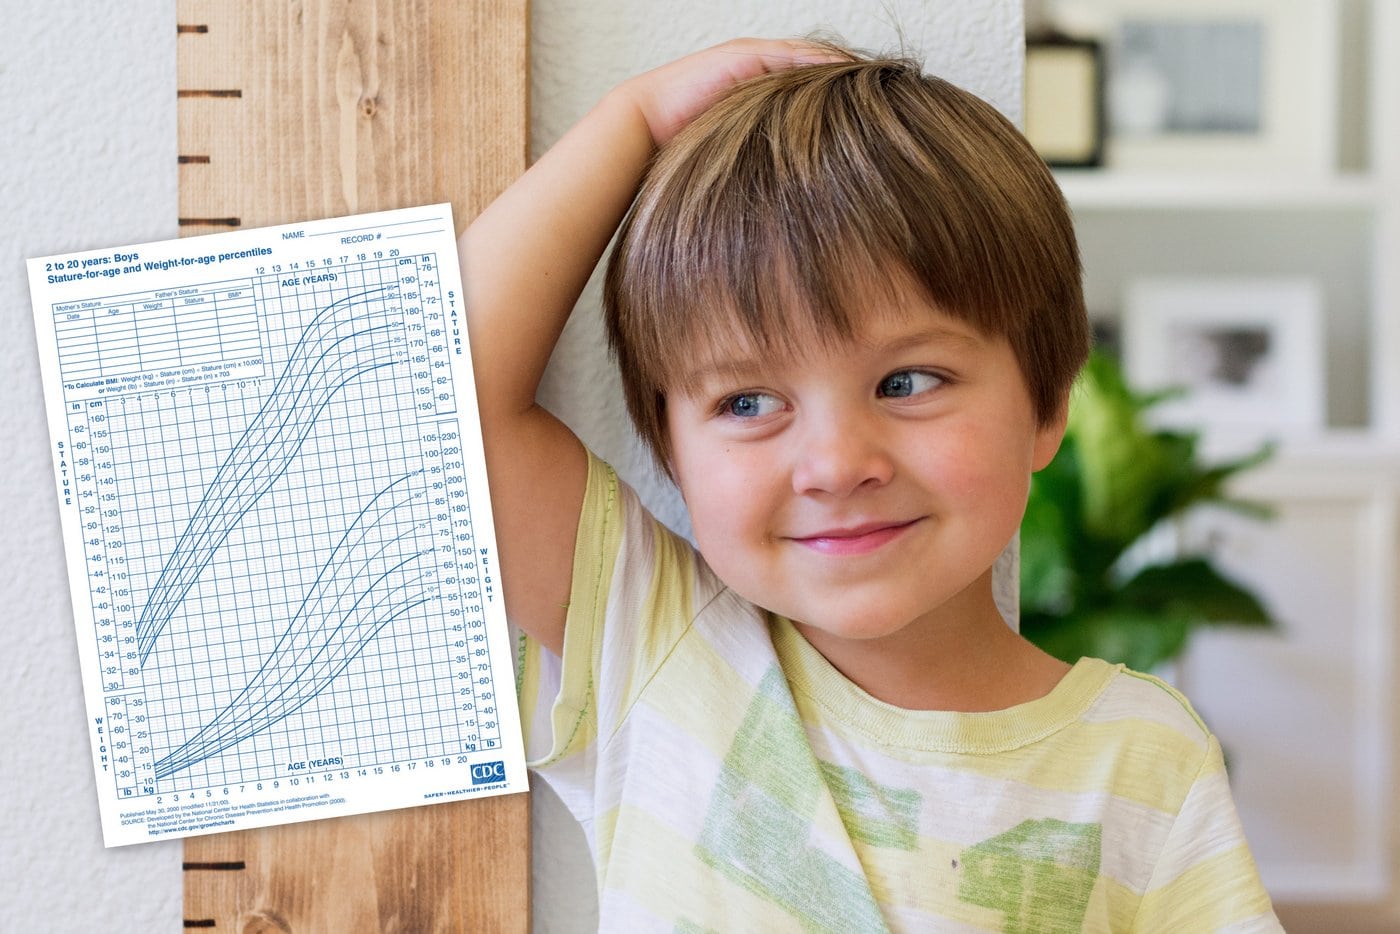 Height and weight growth charts for boys, ages 2 to 20